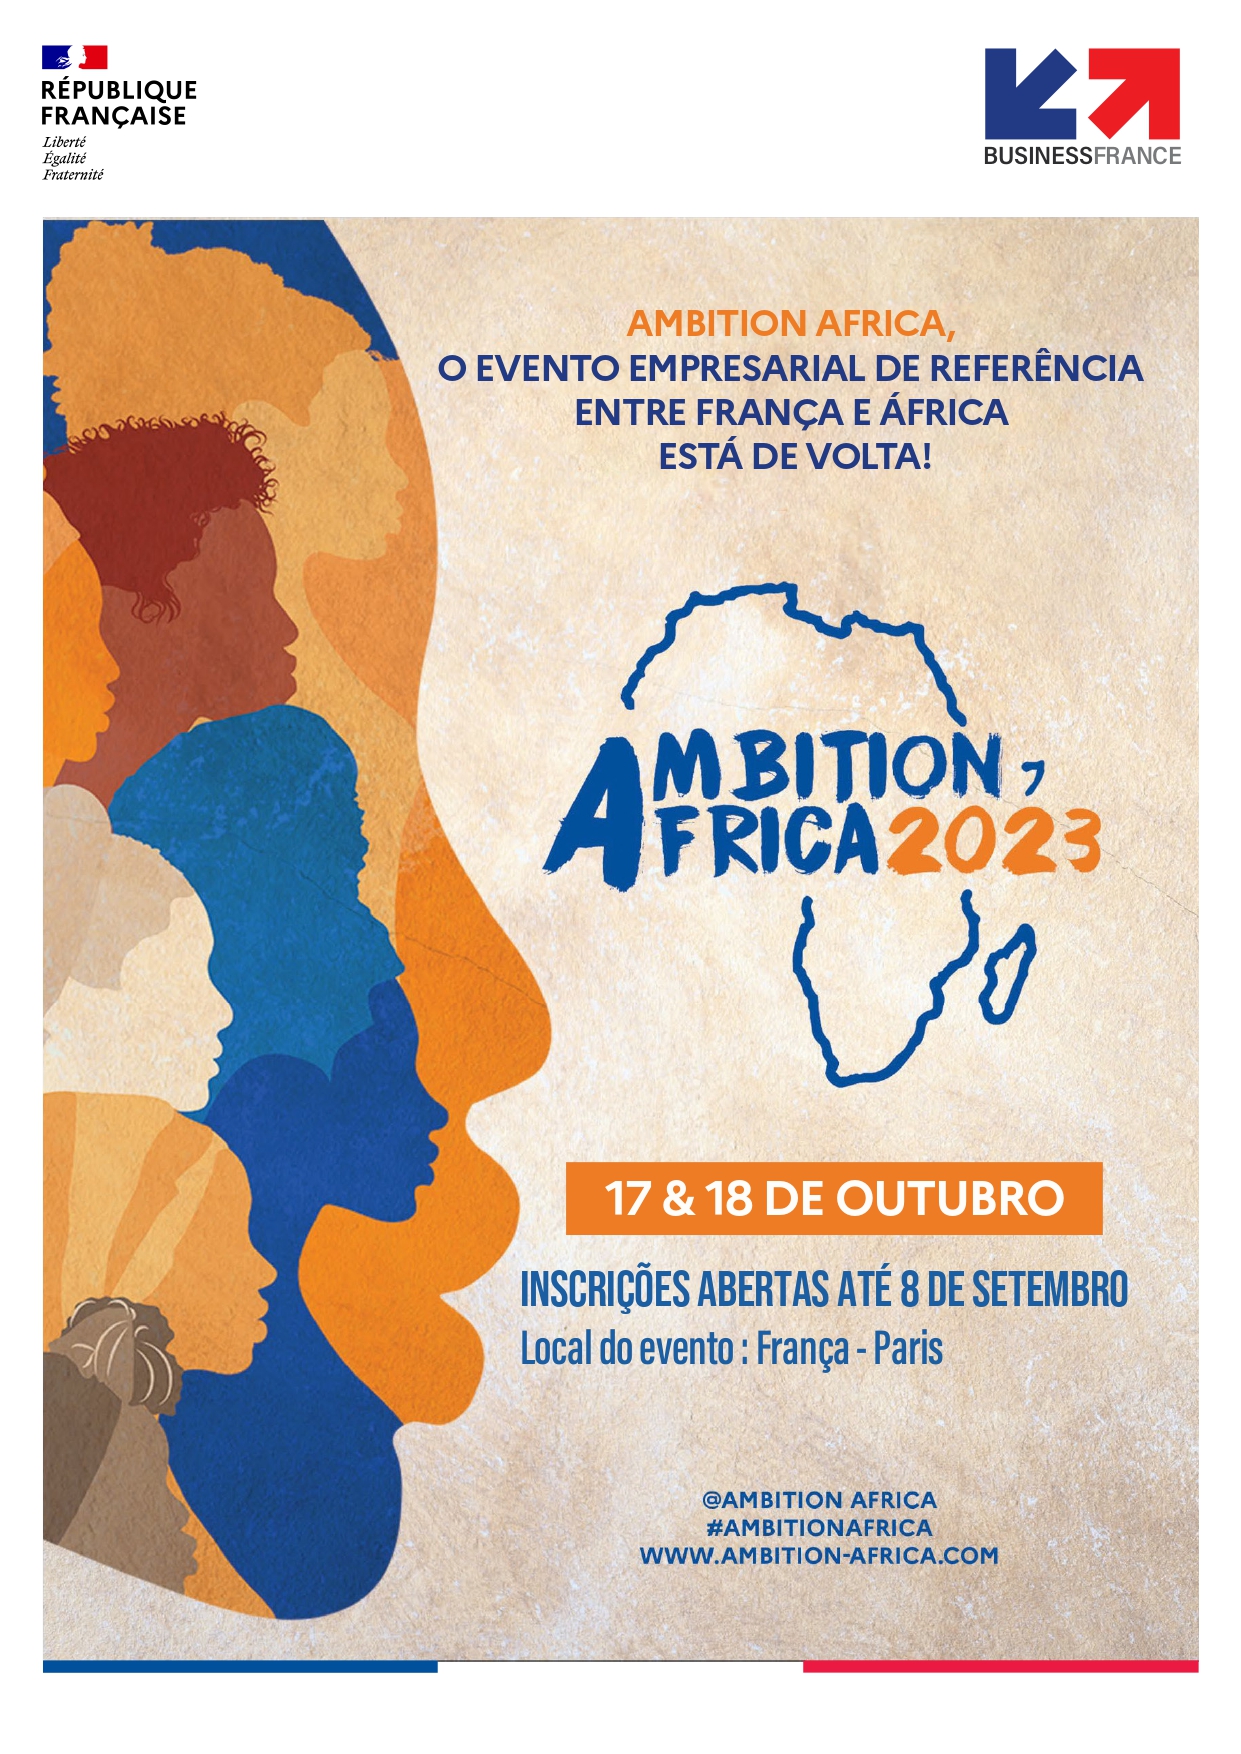 Ambition Africa 2023